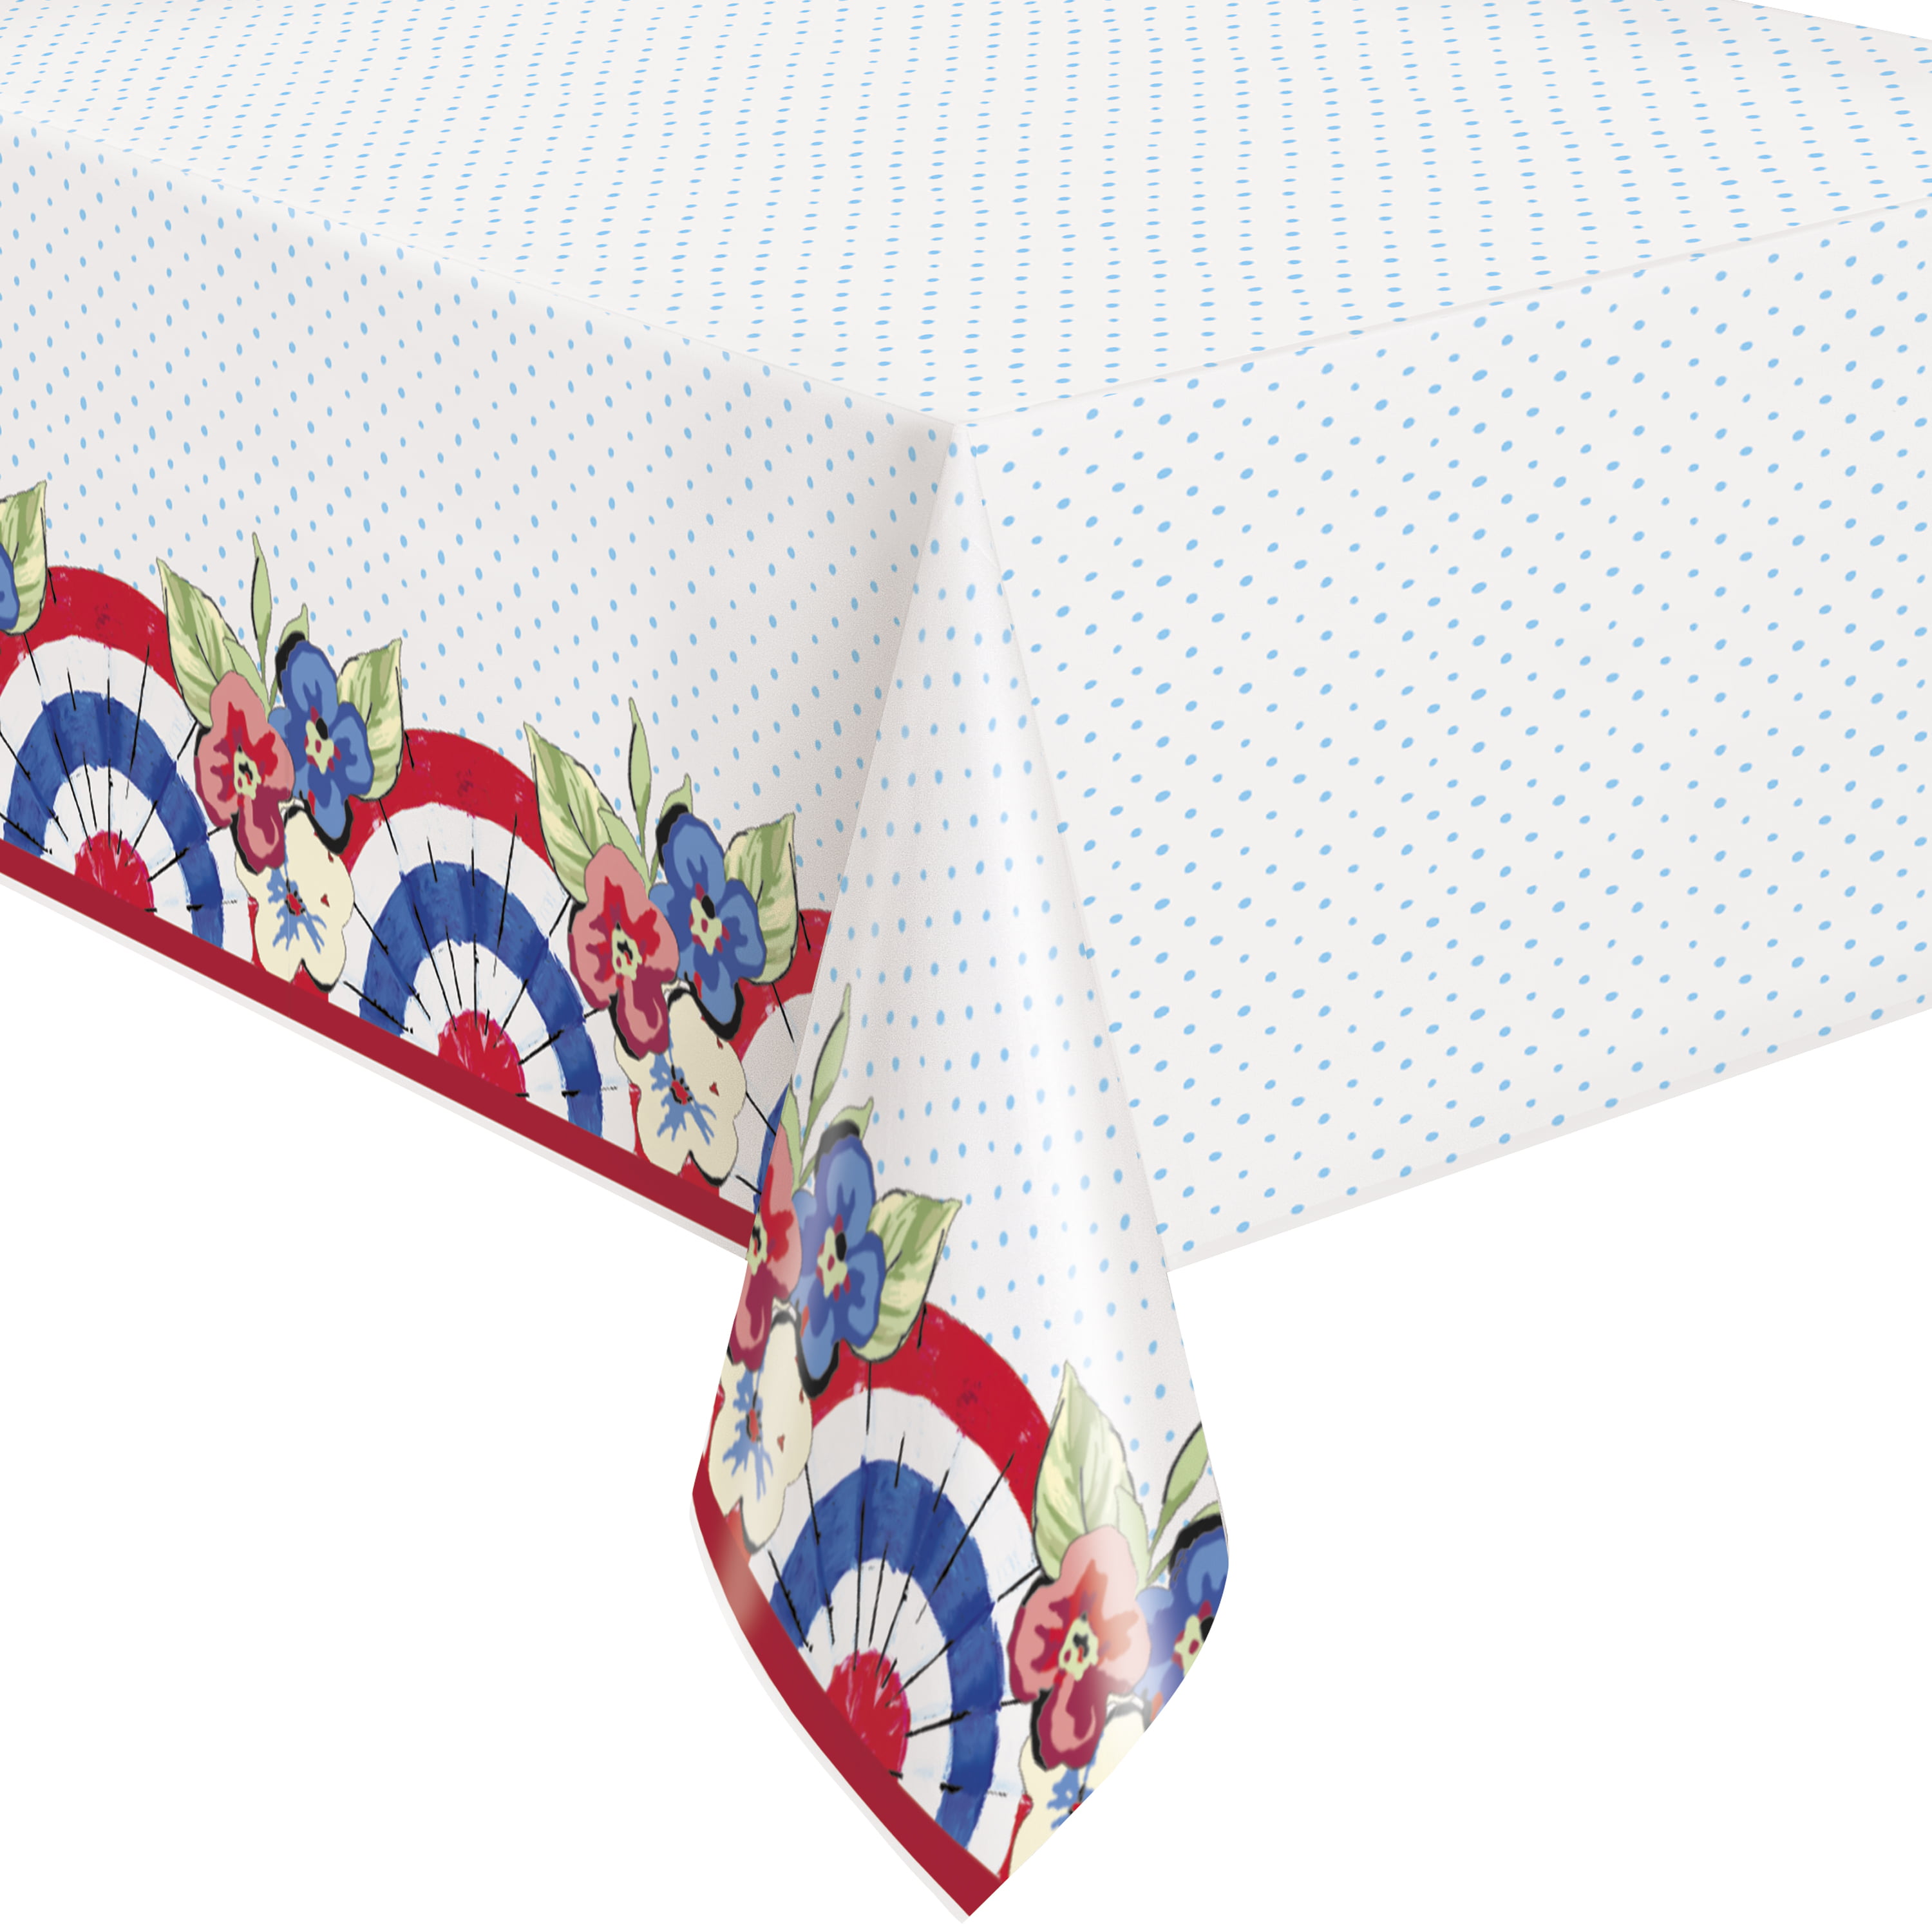 Details about    Patriotic Americana 4th Of July Red White Blue Plastic Table Cover 54 x 108 